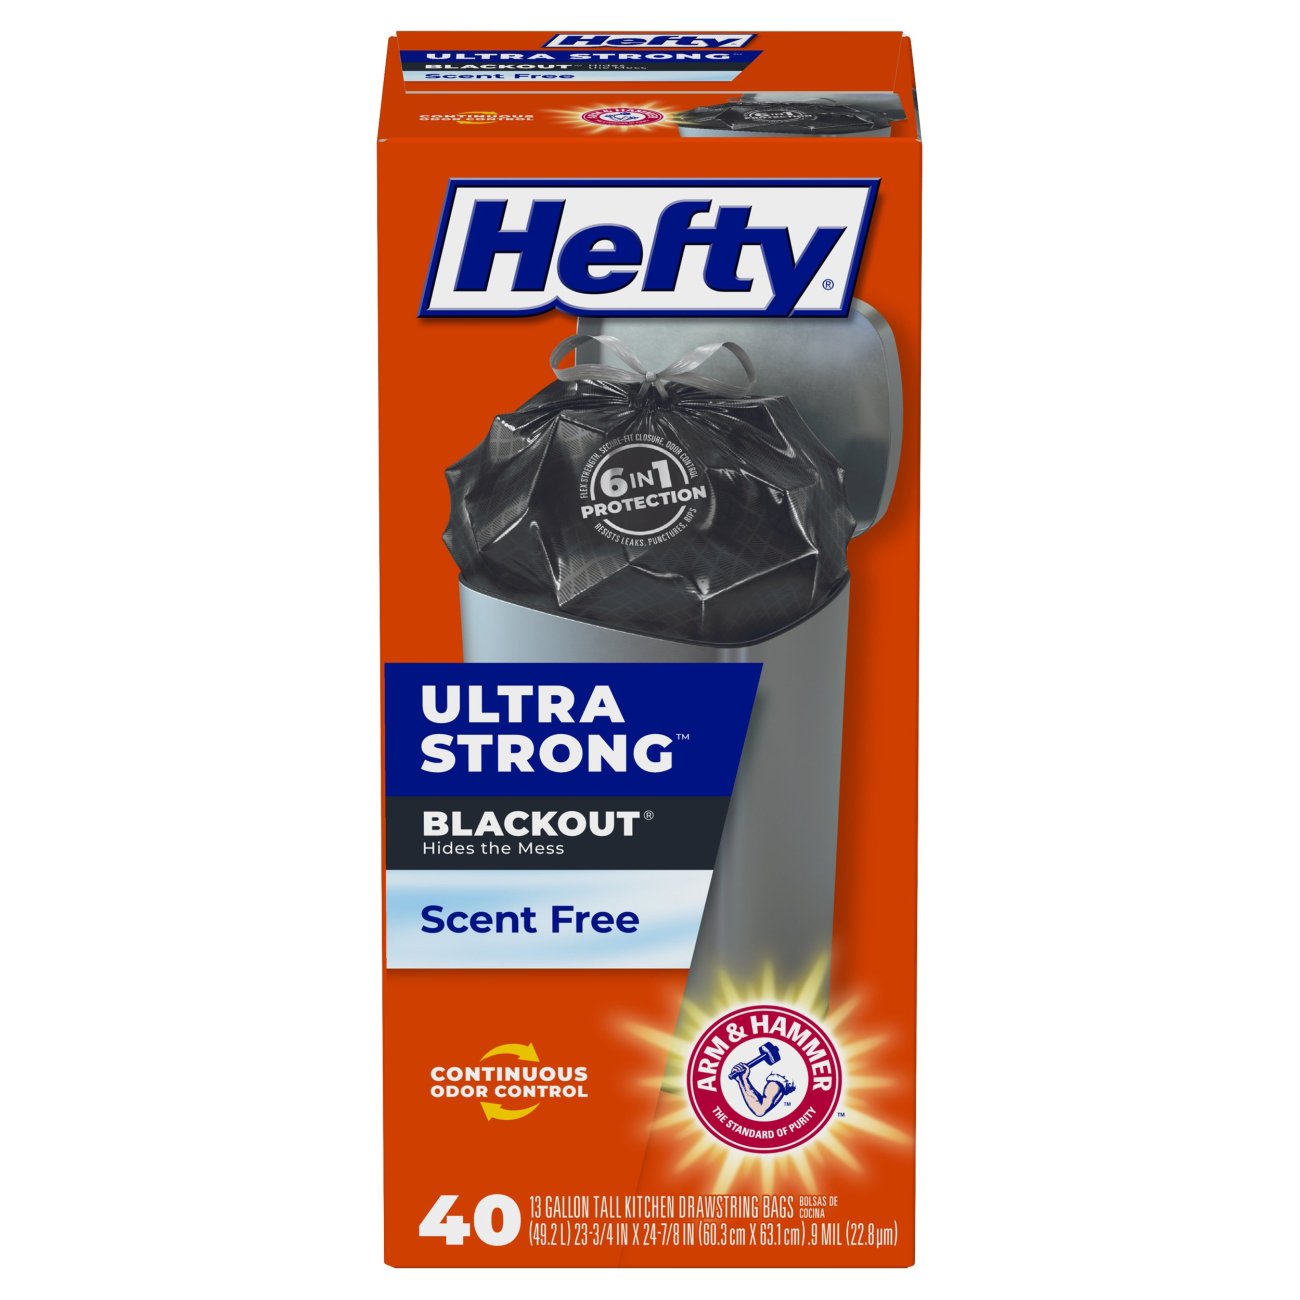 Hefty Ultra Strong Tall Kitchen Trash Bags, Blackout, Unscented, 13 Gallon,  40 Count